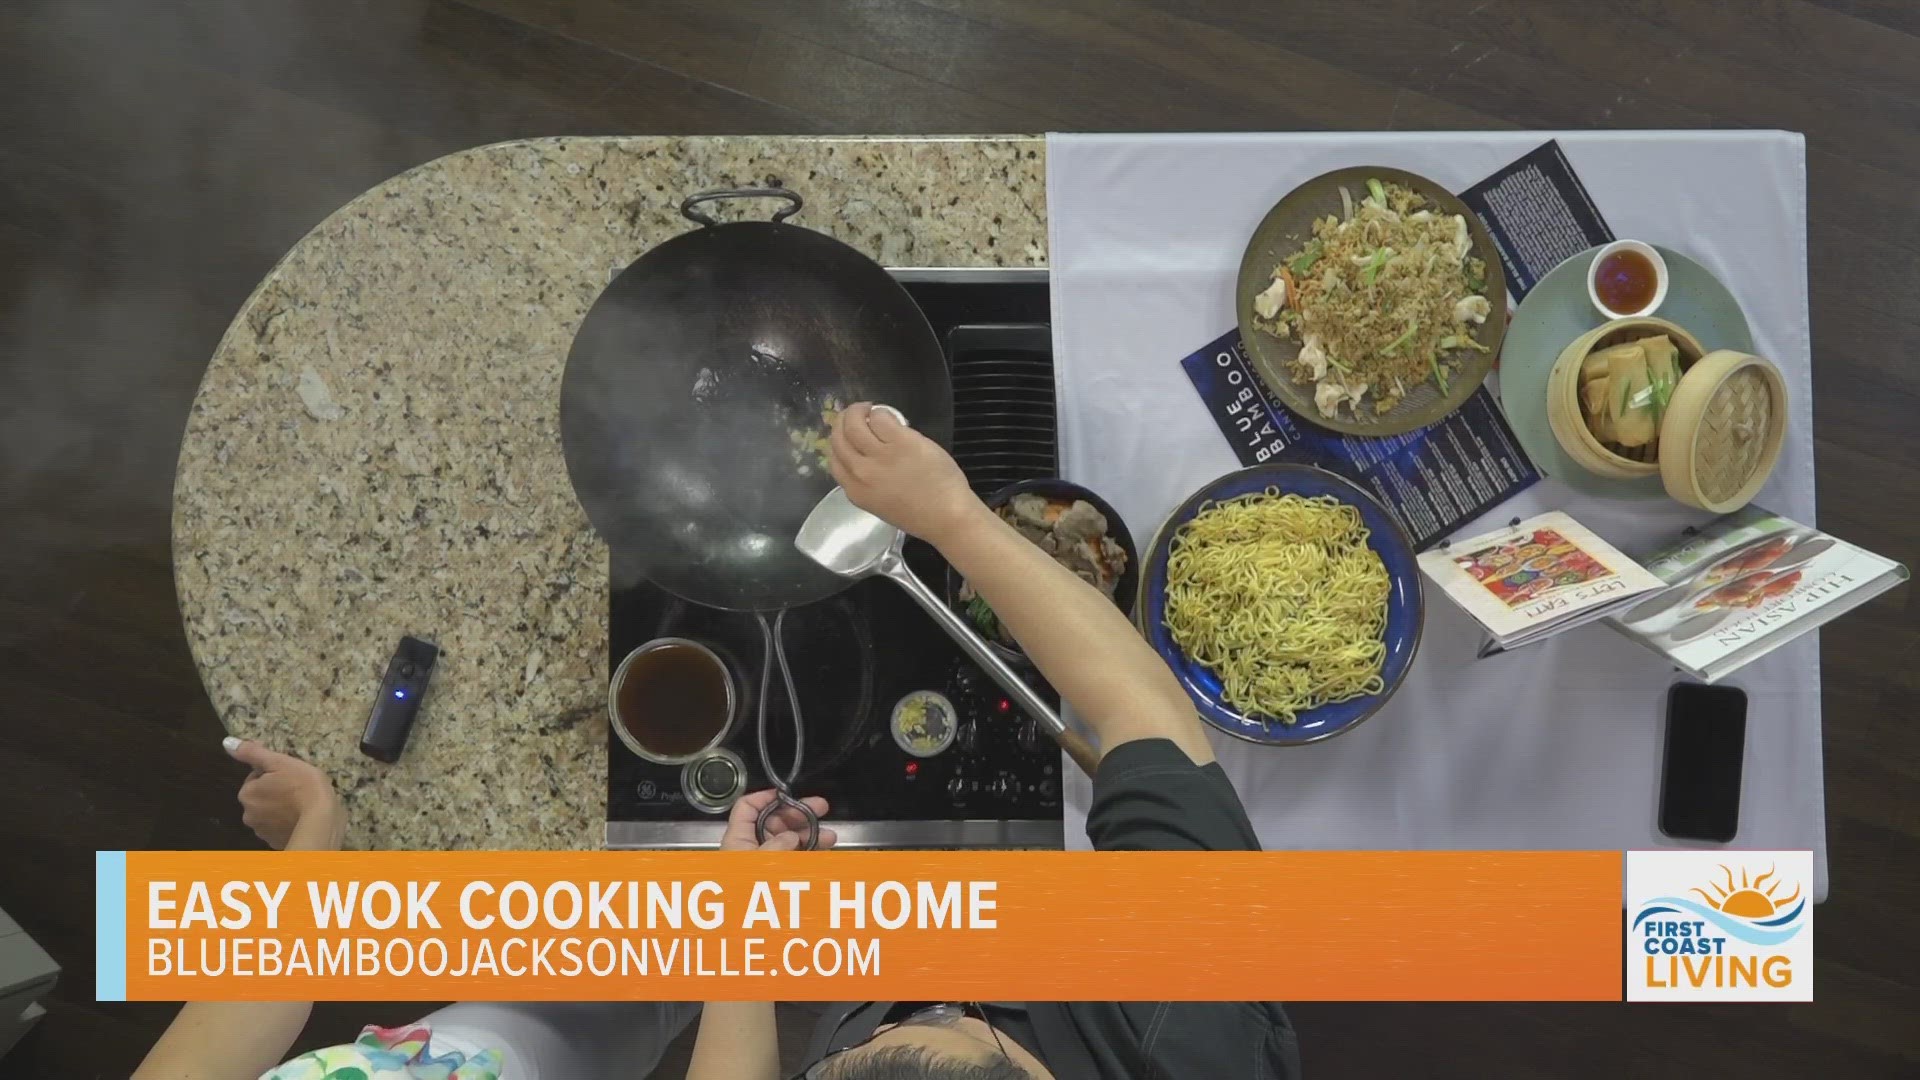 Chef Dennis Chan from Blue Bamboo Jacksonville joins First Coast Living for Livin' in the Kitchen!